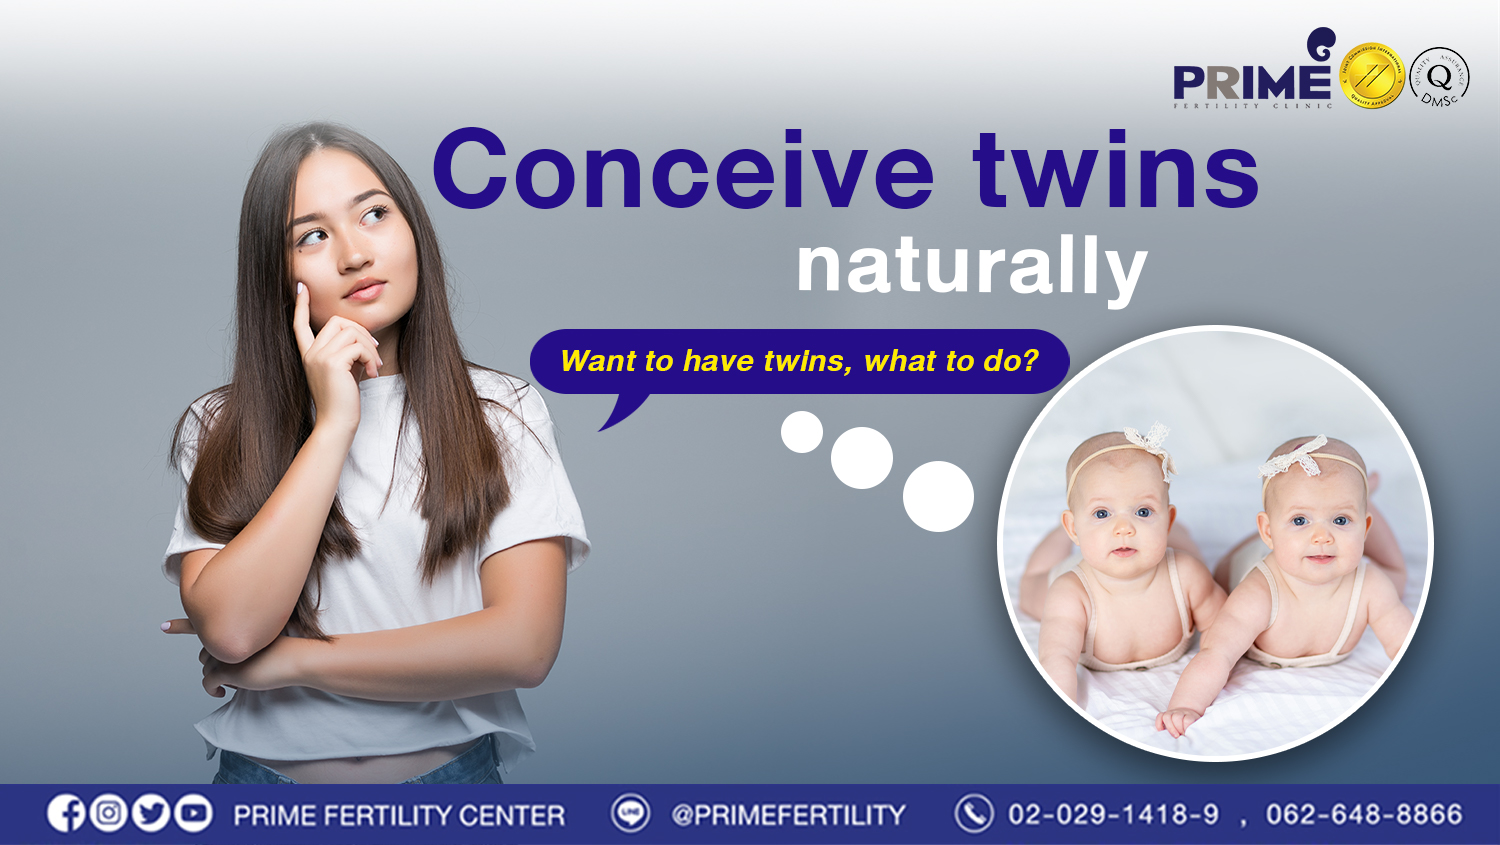 How to Conceive Twins: Factors that increasing chances of having twins naturally